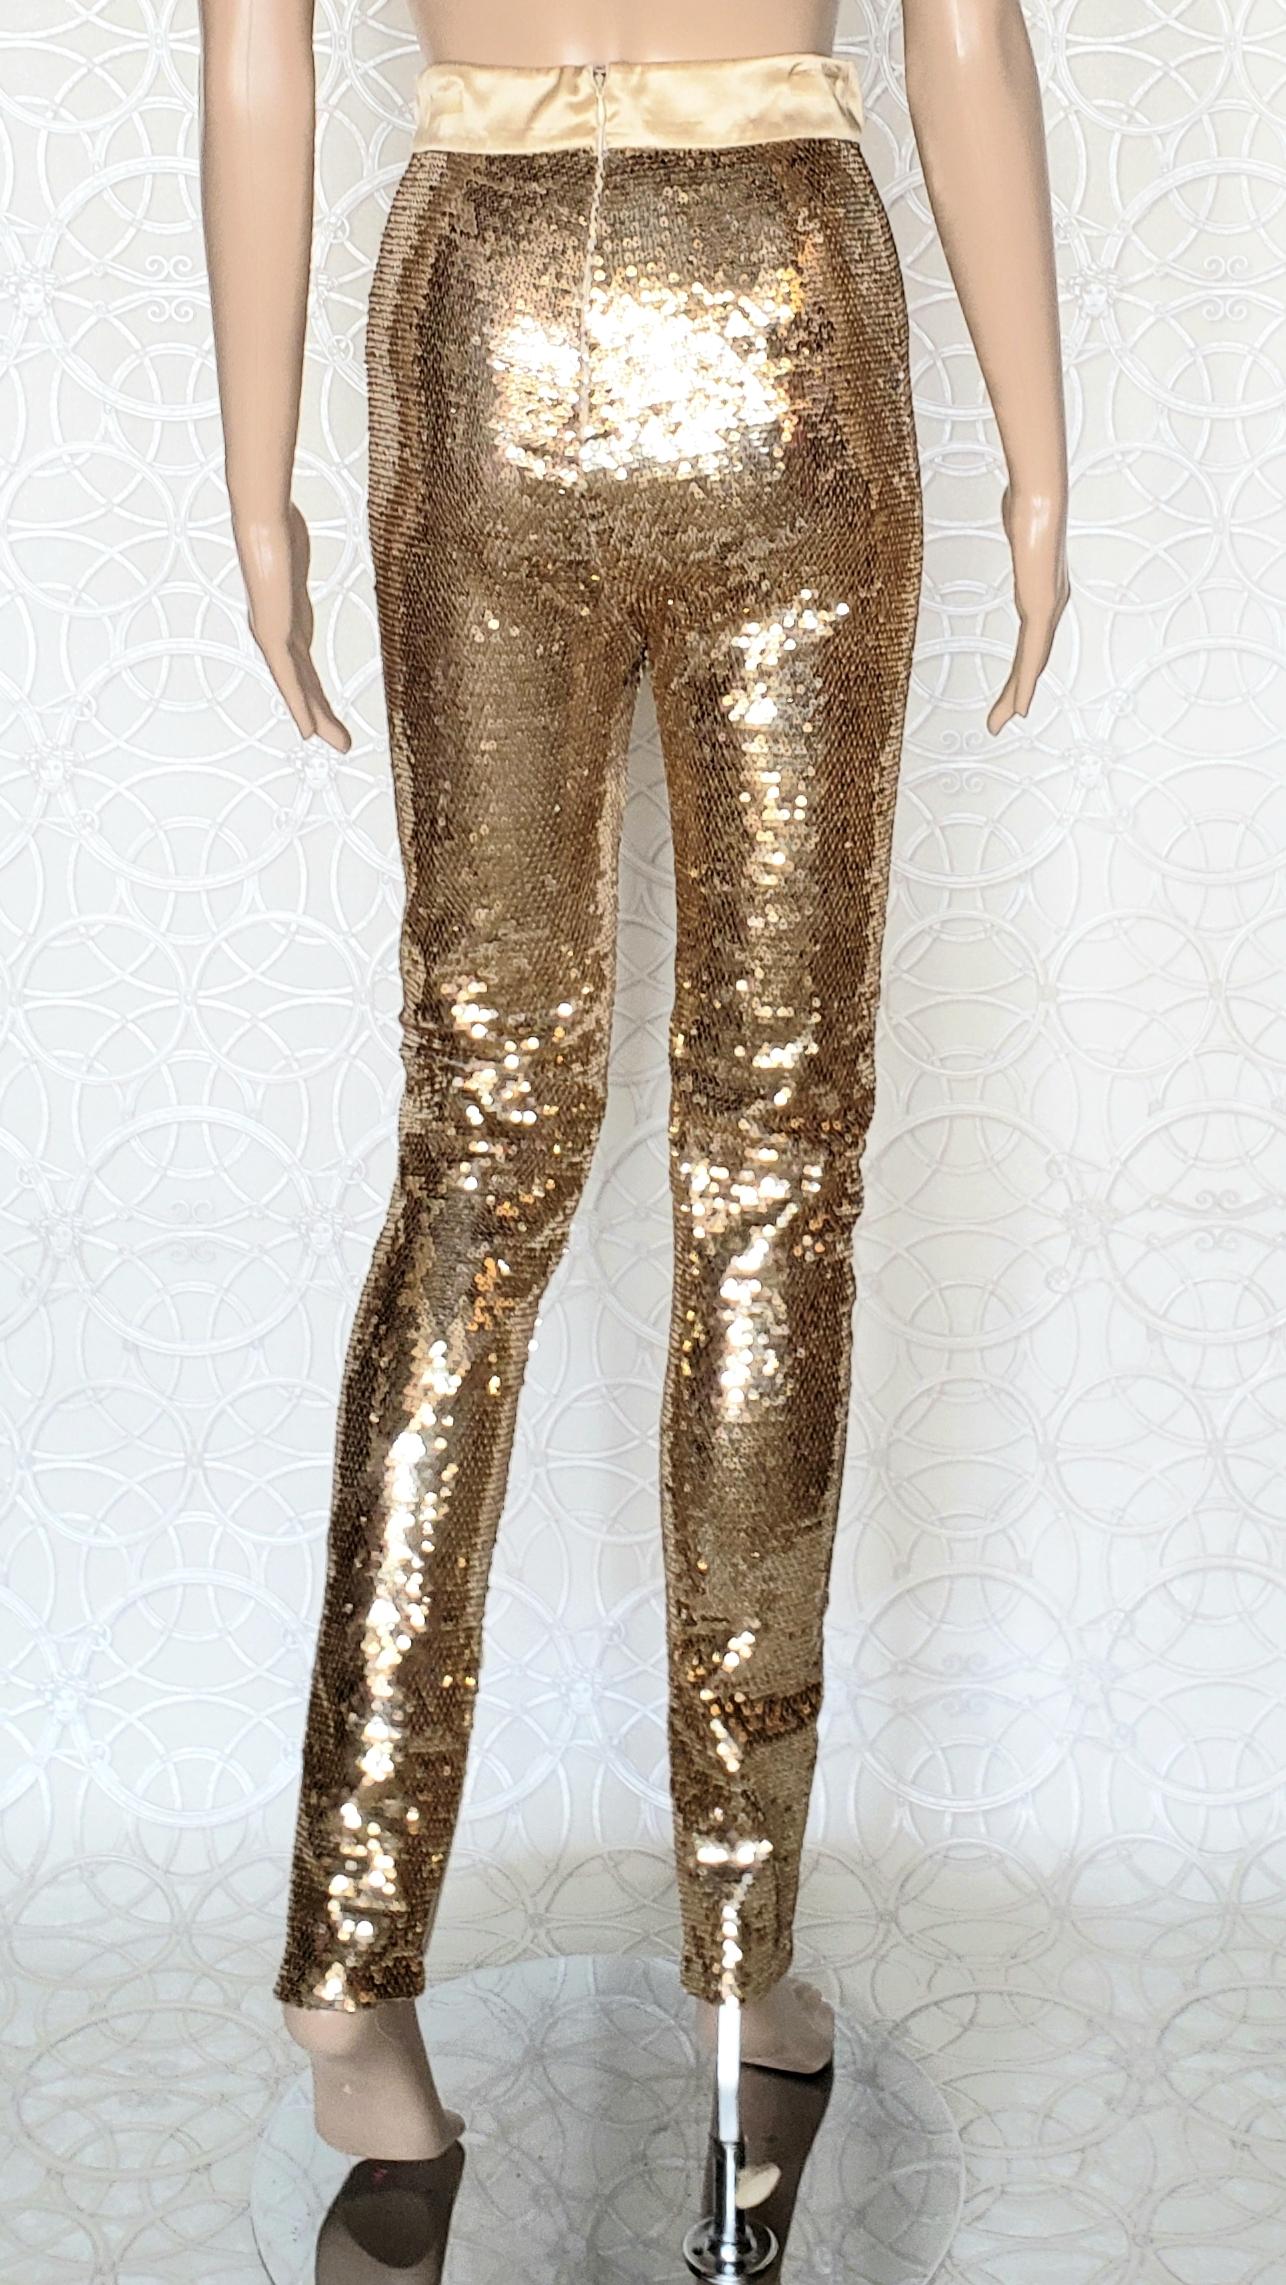 Women's New TOM FORD NUDE EMBELLISHED CHIFFON DRESS w/ GOLD SEQUIN PANTS 38 - 2